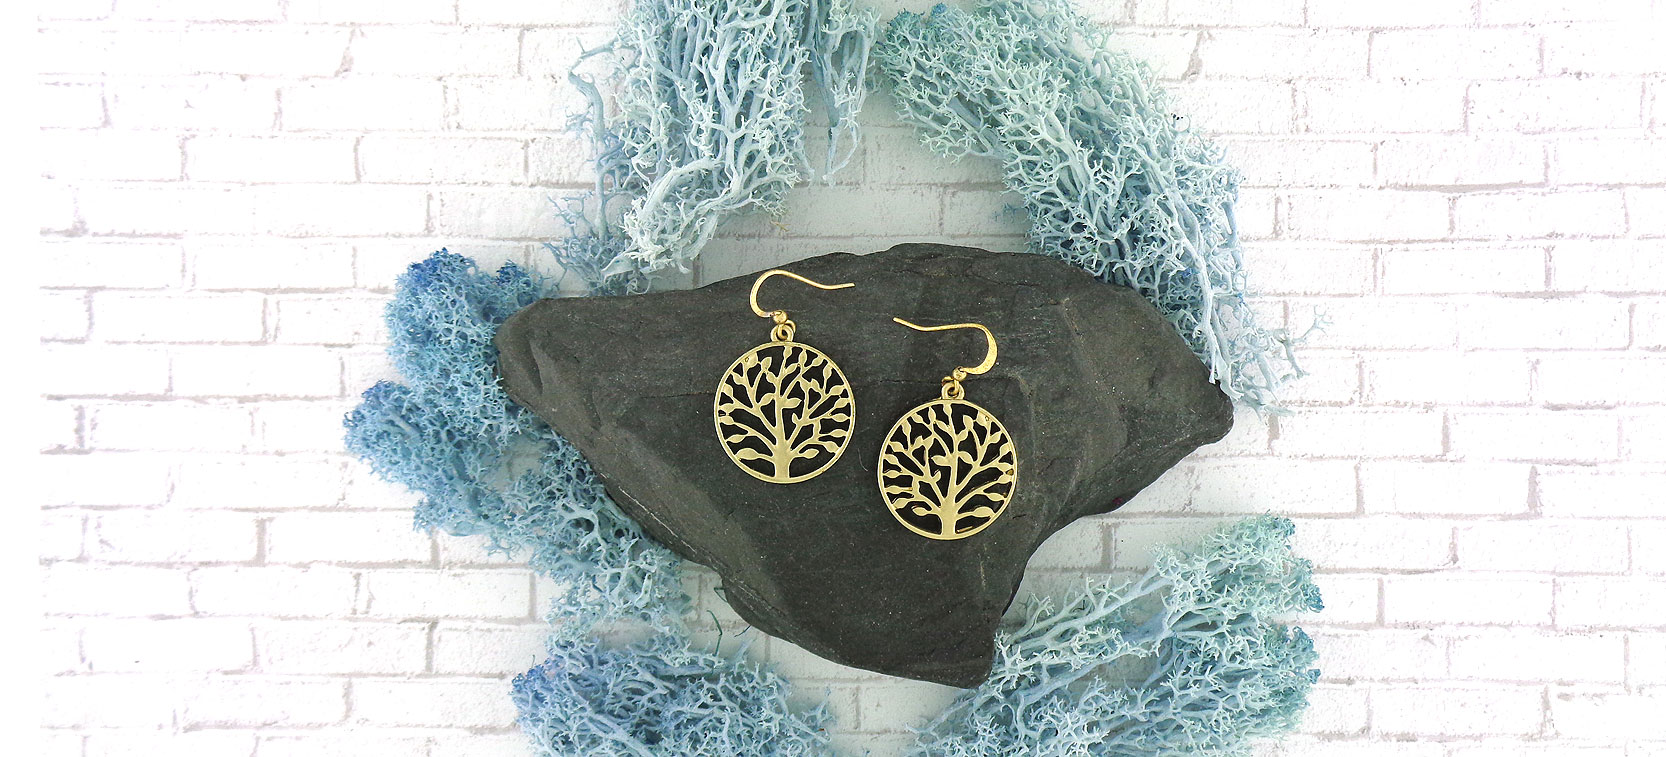 LAVISHY design and wholesale tree themed vegan accessories and gfits to gift shops, boutiques and garden centers, botanical garden gift stores in Canada, USA and worldwide.